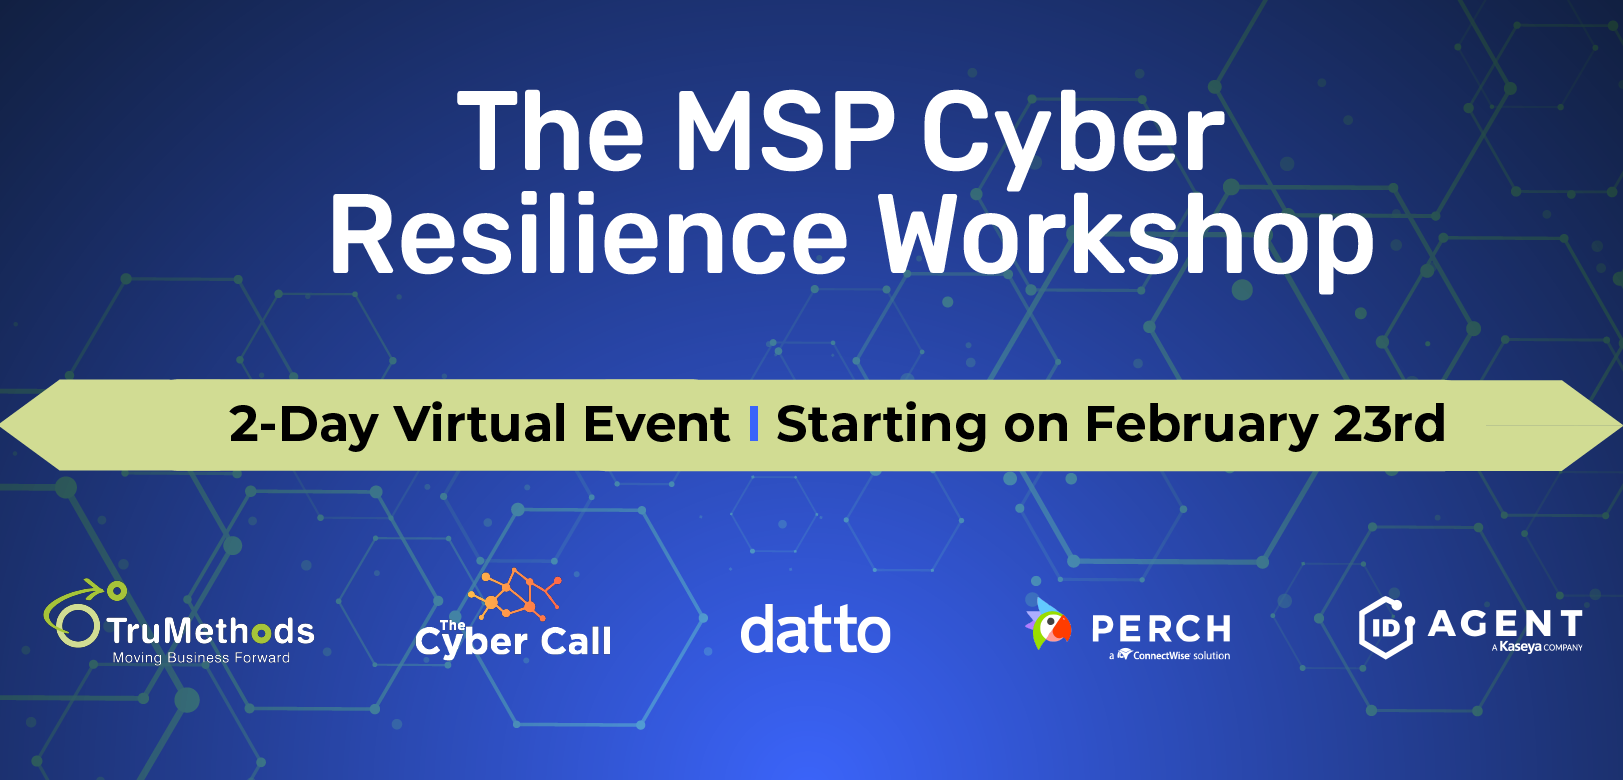 Two-Day Special Event: The MSP Cyber Resilience Workshop